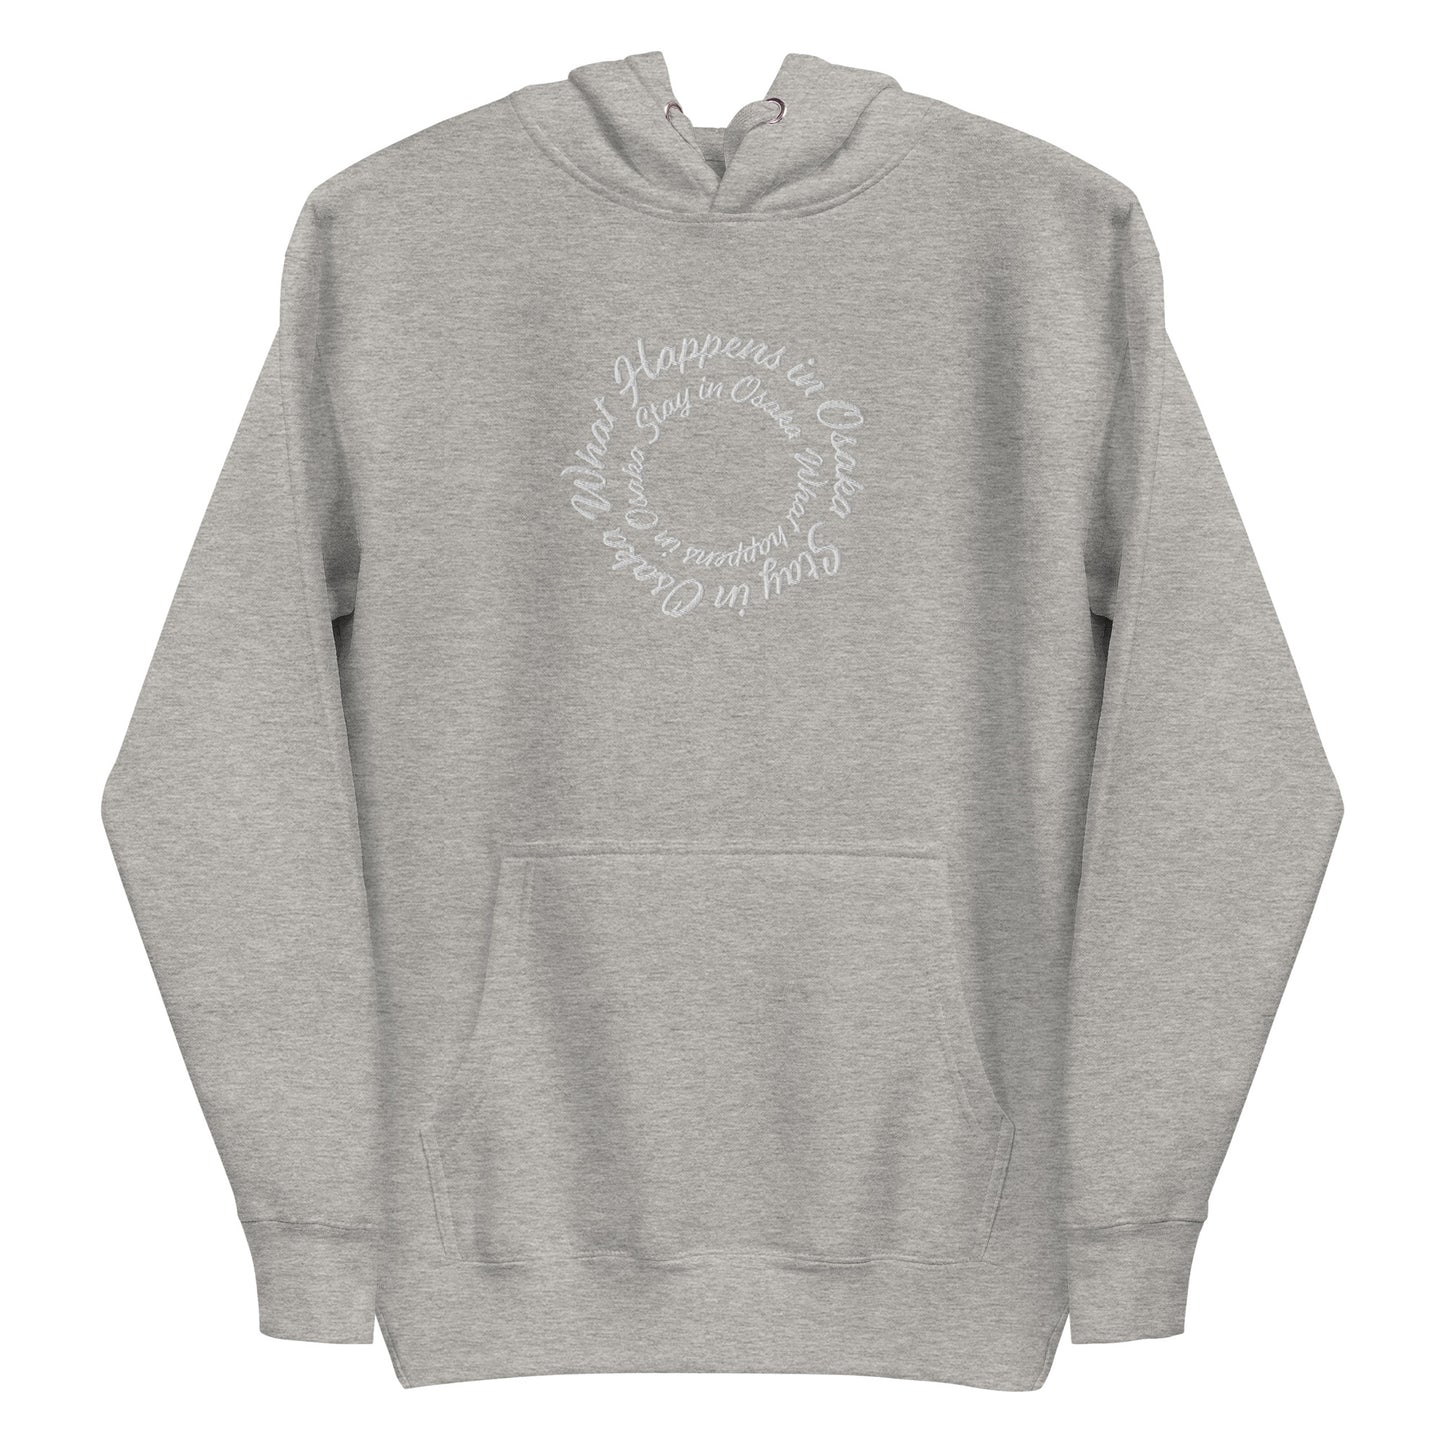 Light Gray High Quality Hoodie - Front Design with White Embroidery of "What Happens in Osaka Stay in Osaka"